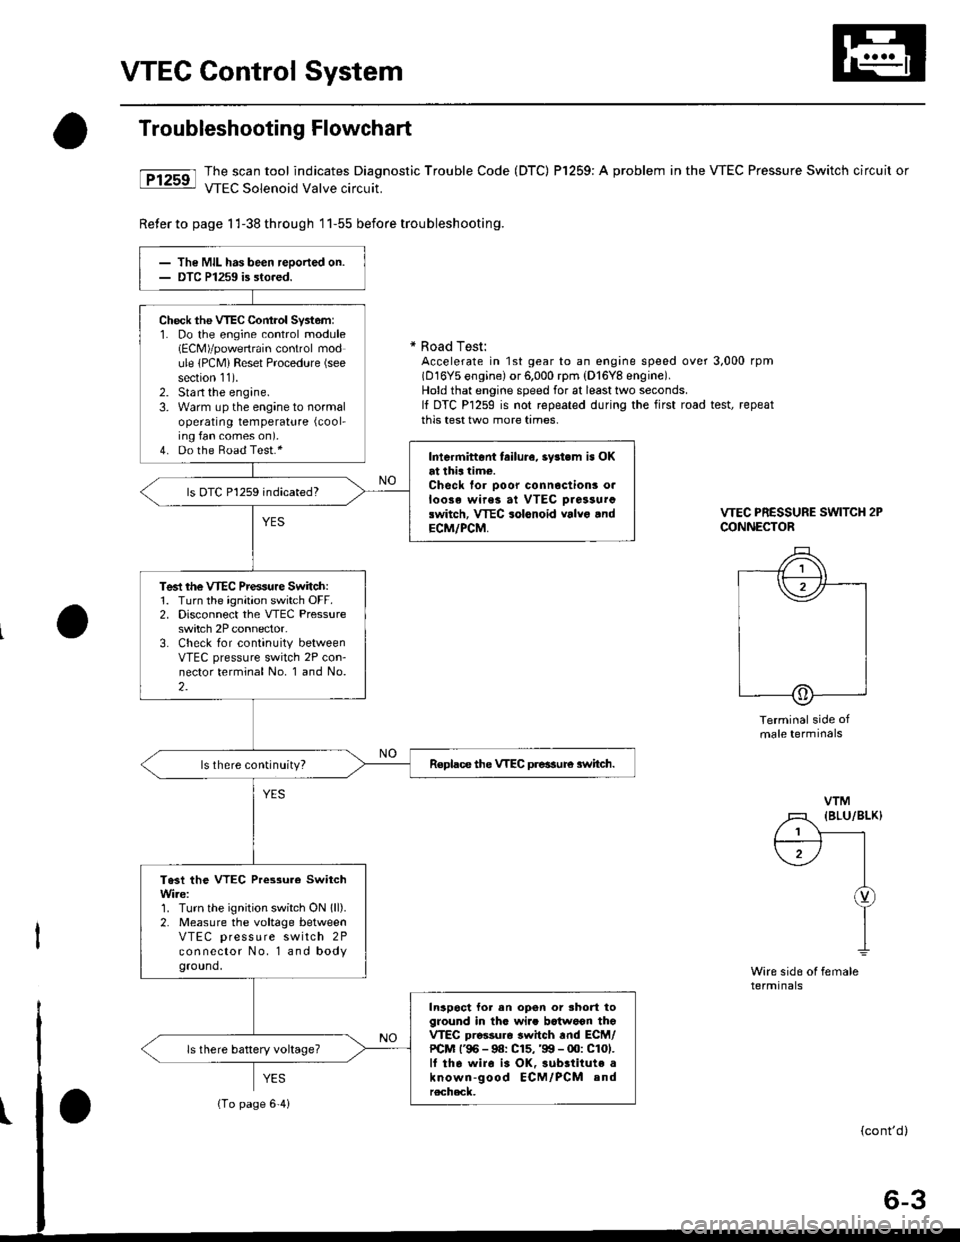 HONDA CIVIC 2000 6.G Workshop Manual VTEC Control System
Troubleshooting Flowchart
tFtrsrl #ilH:::lj1t:"J:T,?ffnostic 
rrouble code (Drc) Pr25e: A probrem in the vrEc Pressure switch circuit or
Reter to page 1 l-38 th roug h 1 1-55 befor